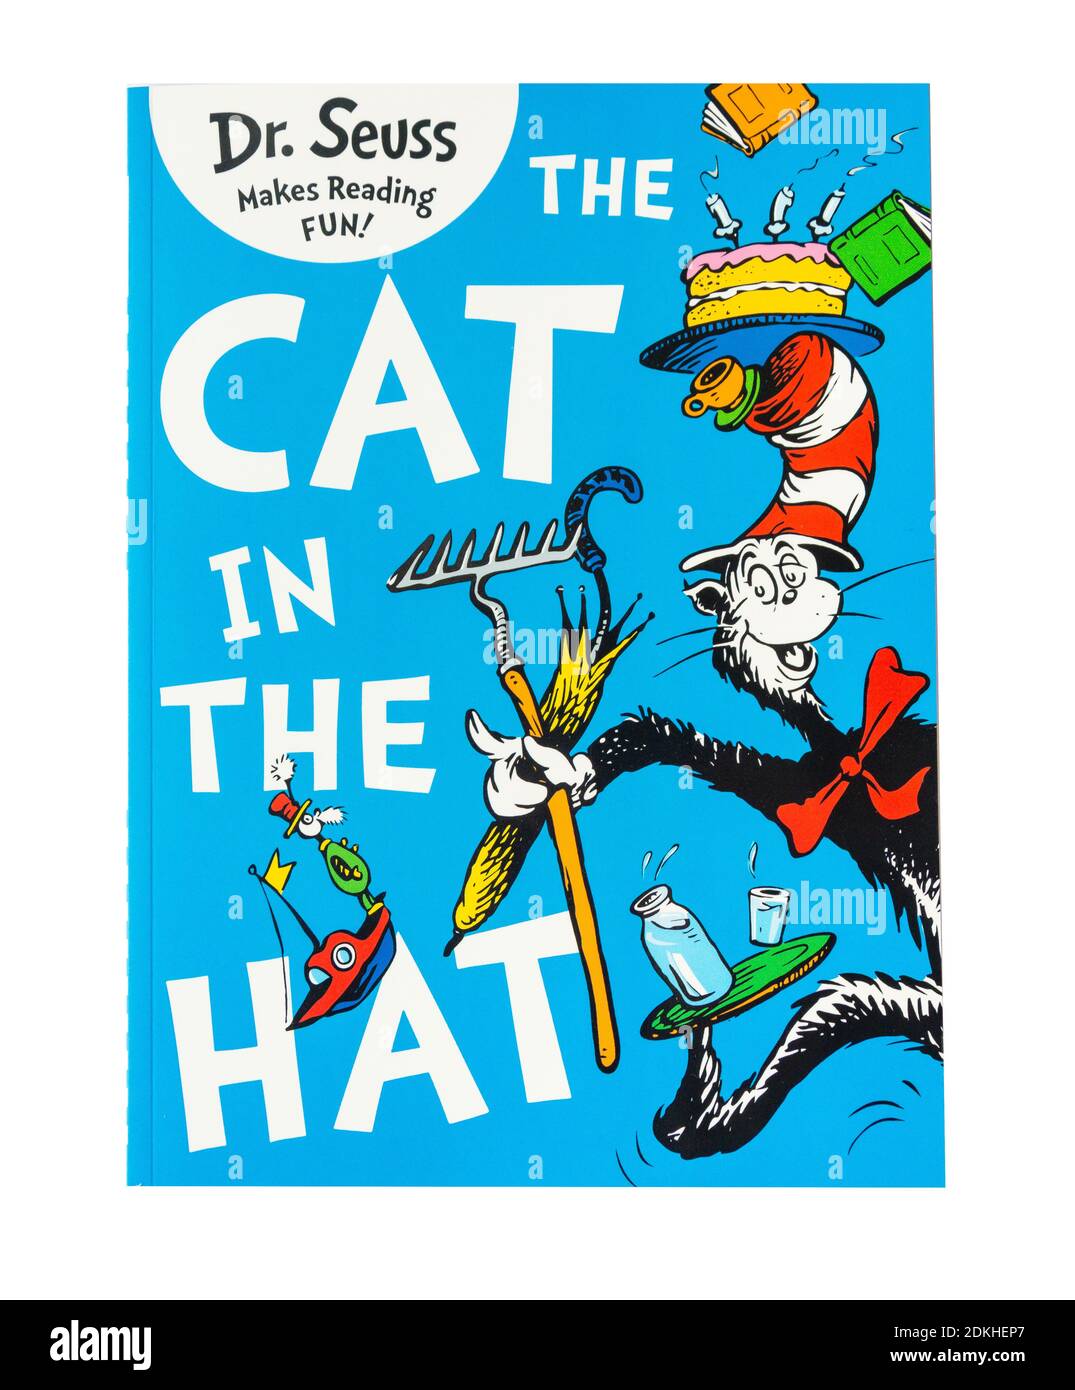 The Cat in the Hat by Dr Seuss, Greater London, England, United Kingdom Stock Photo